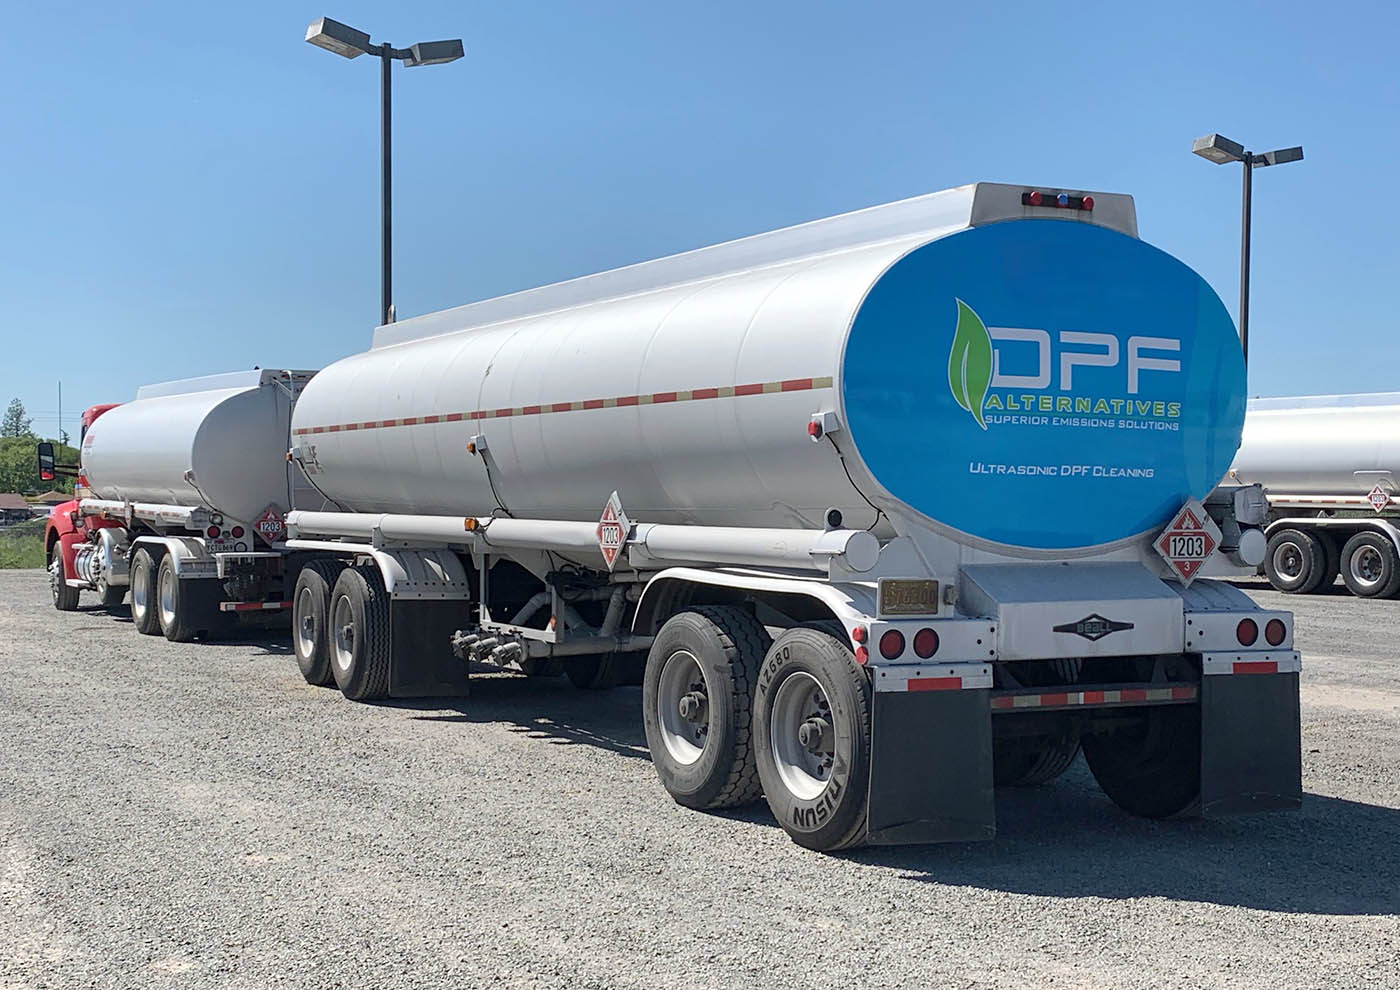 Back of a clean, large, reflective semi truck rig, contact DPF Alternatives for a DPF cleaning in West Virginia & Tri-State.